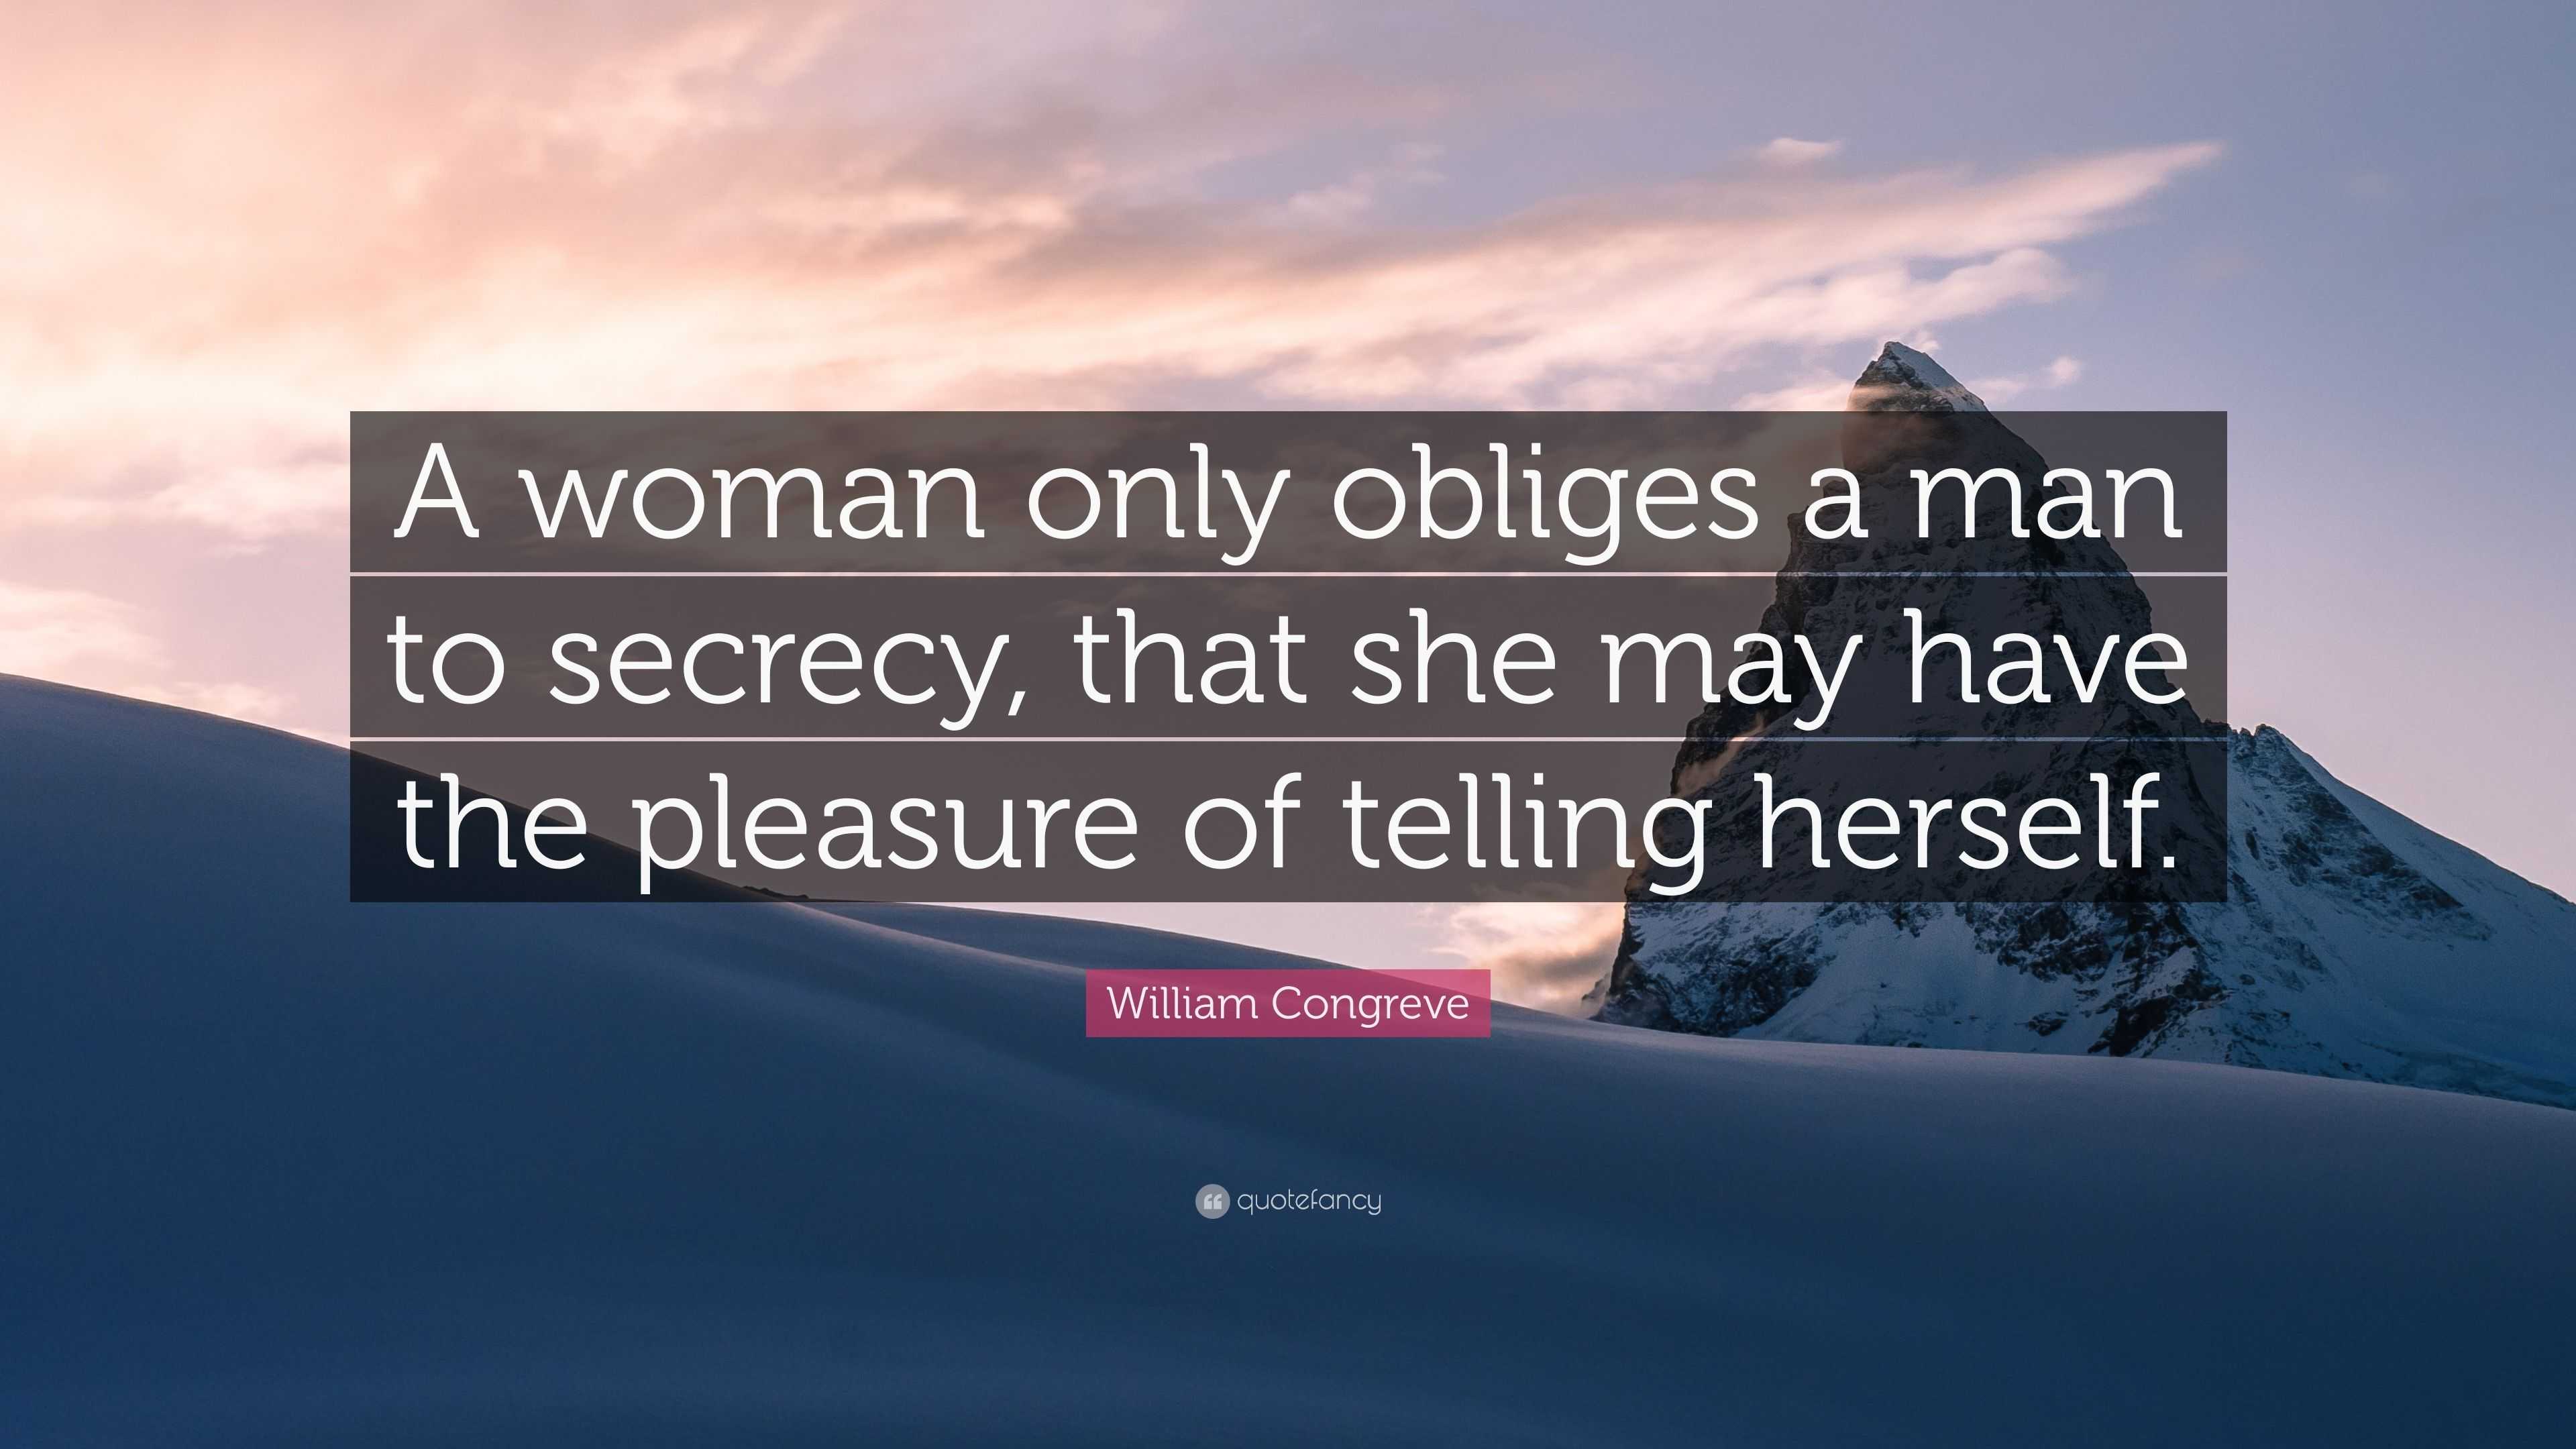 William Congreve Quote “a Woman Only Obliges A Man To Secrecy That She May Have The Pleasure